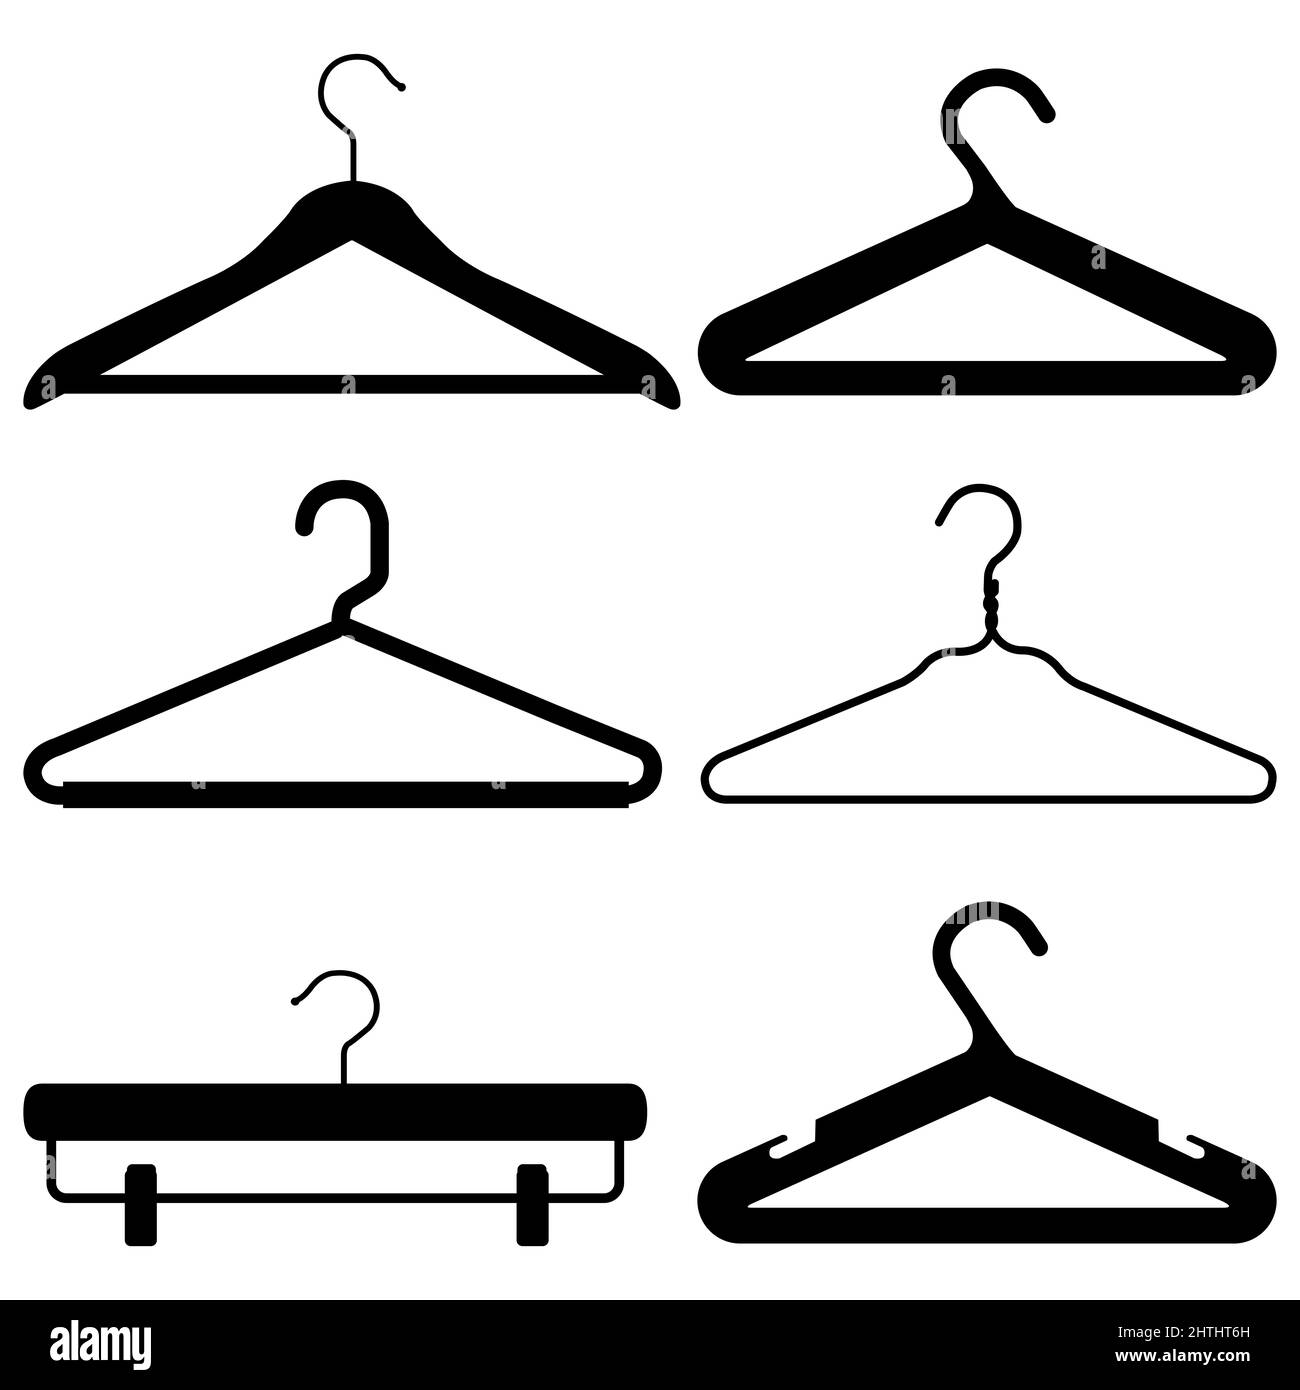 https://c8.alamy.com/comp/2HTHT6H/clothes-hangers-icon-set-on-white-background-2HTHT6H.jpg